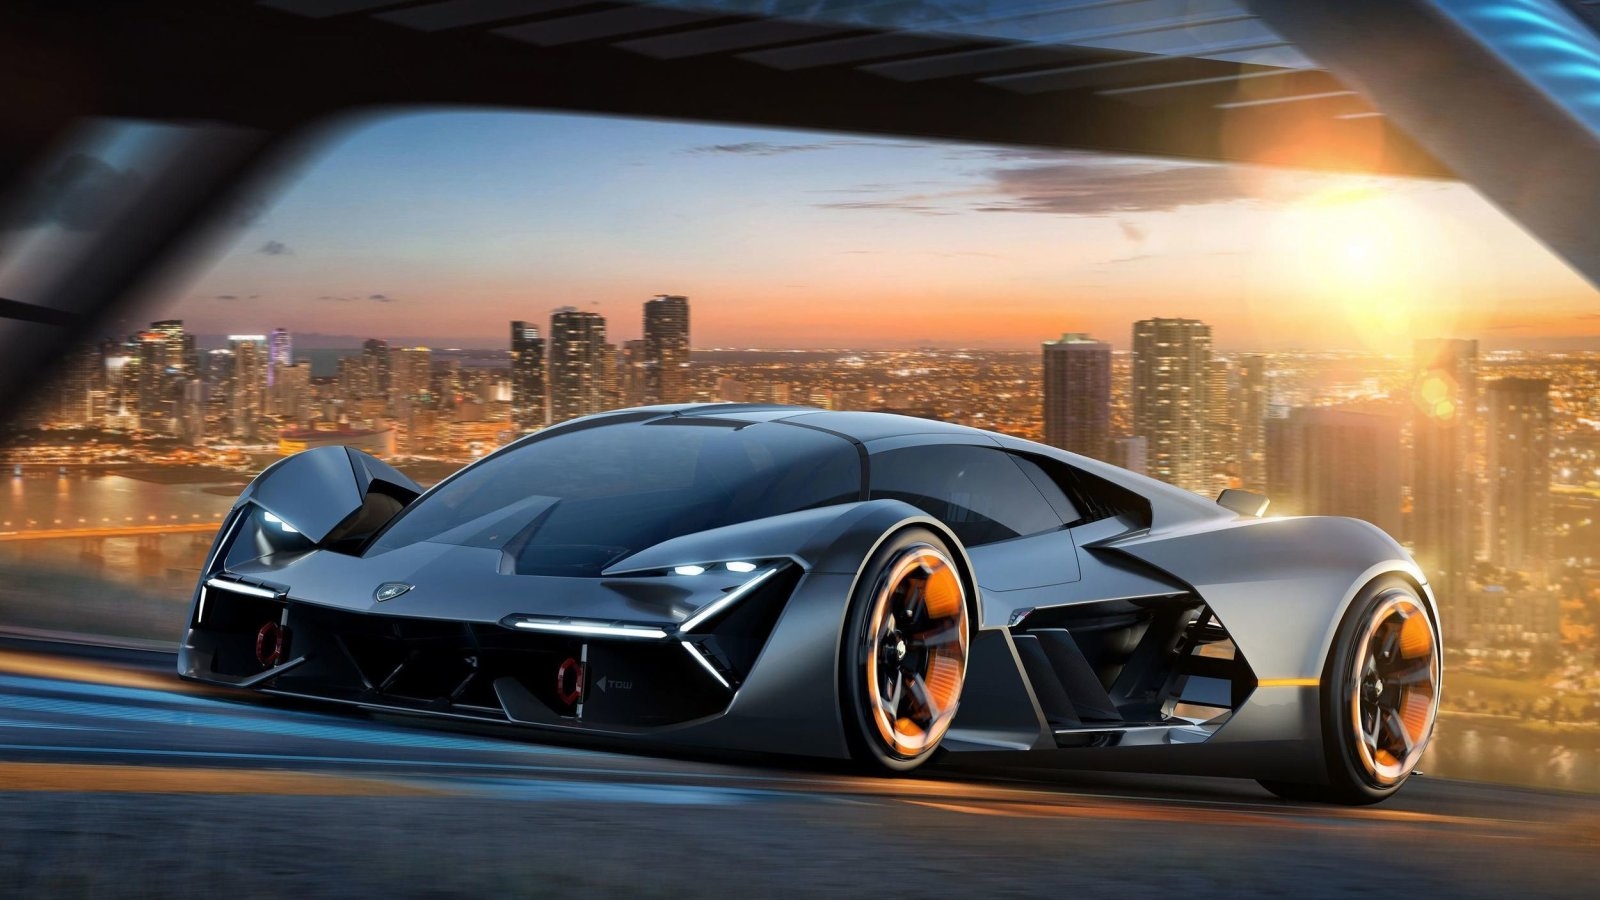 Lamborghini LB48H hypercar due next year: You might even say it glows | DeviceDaily.com